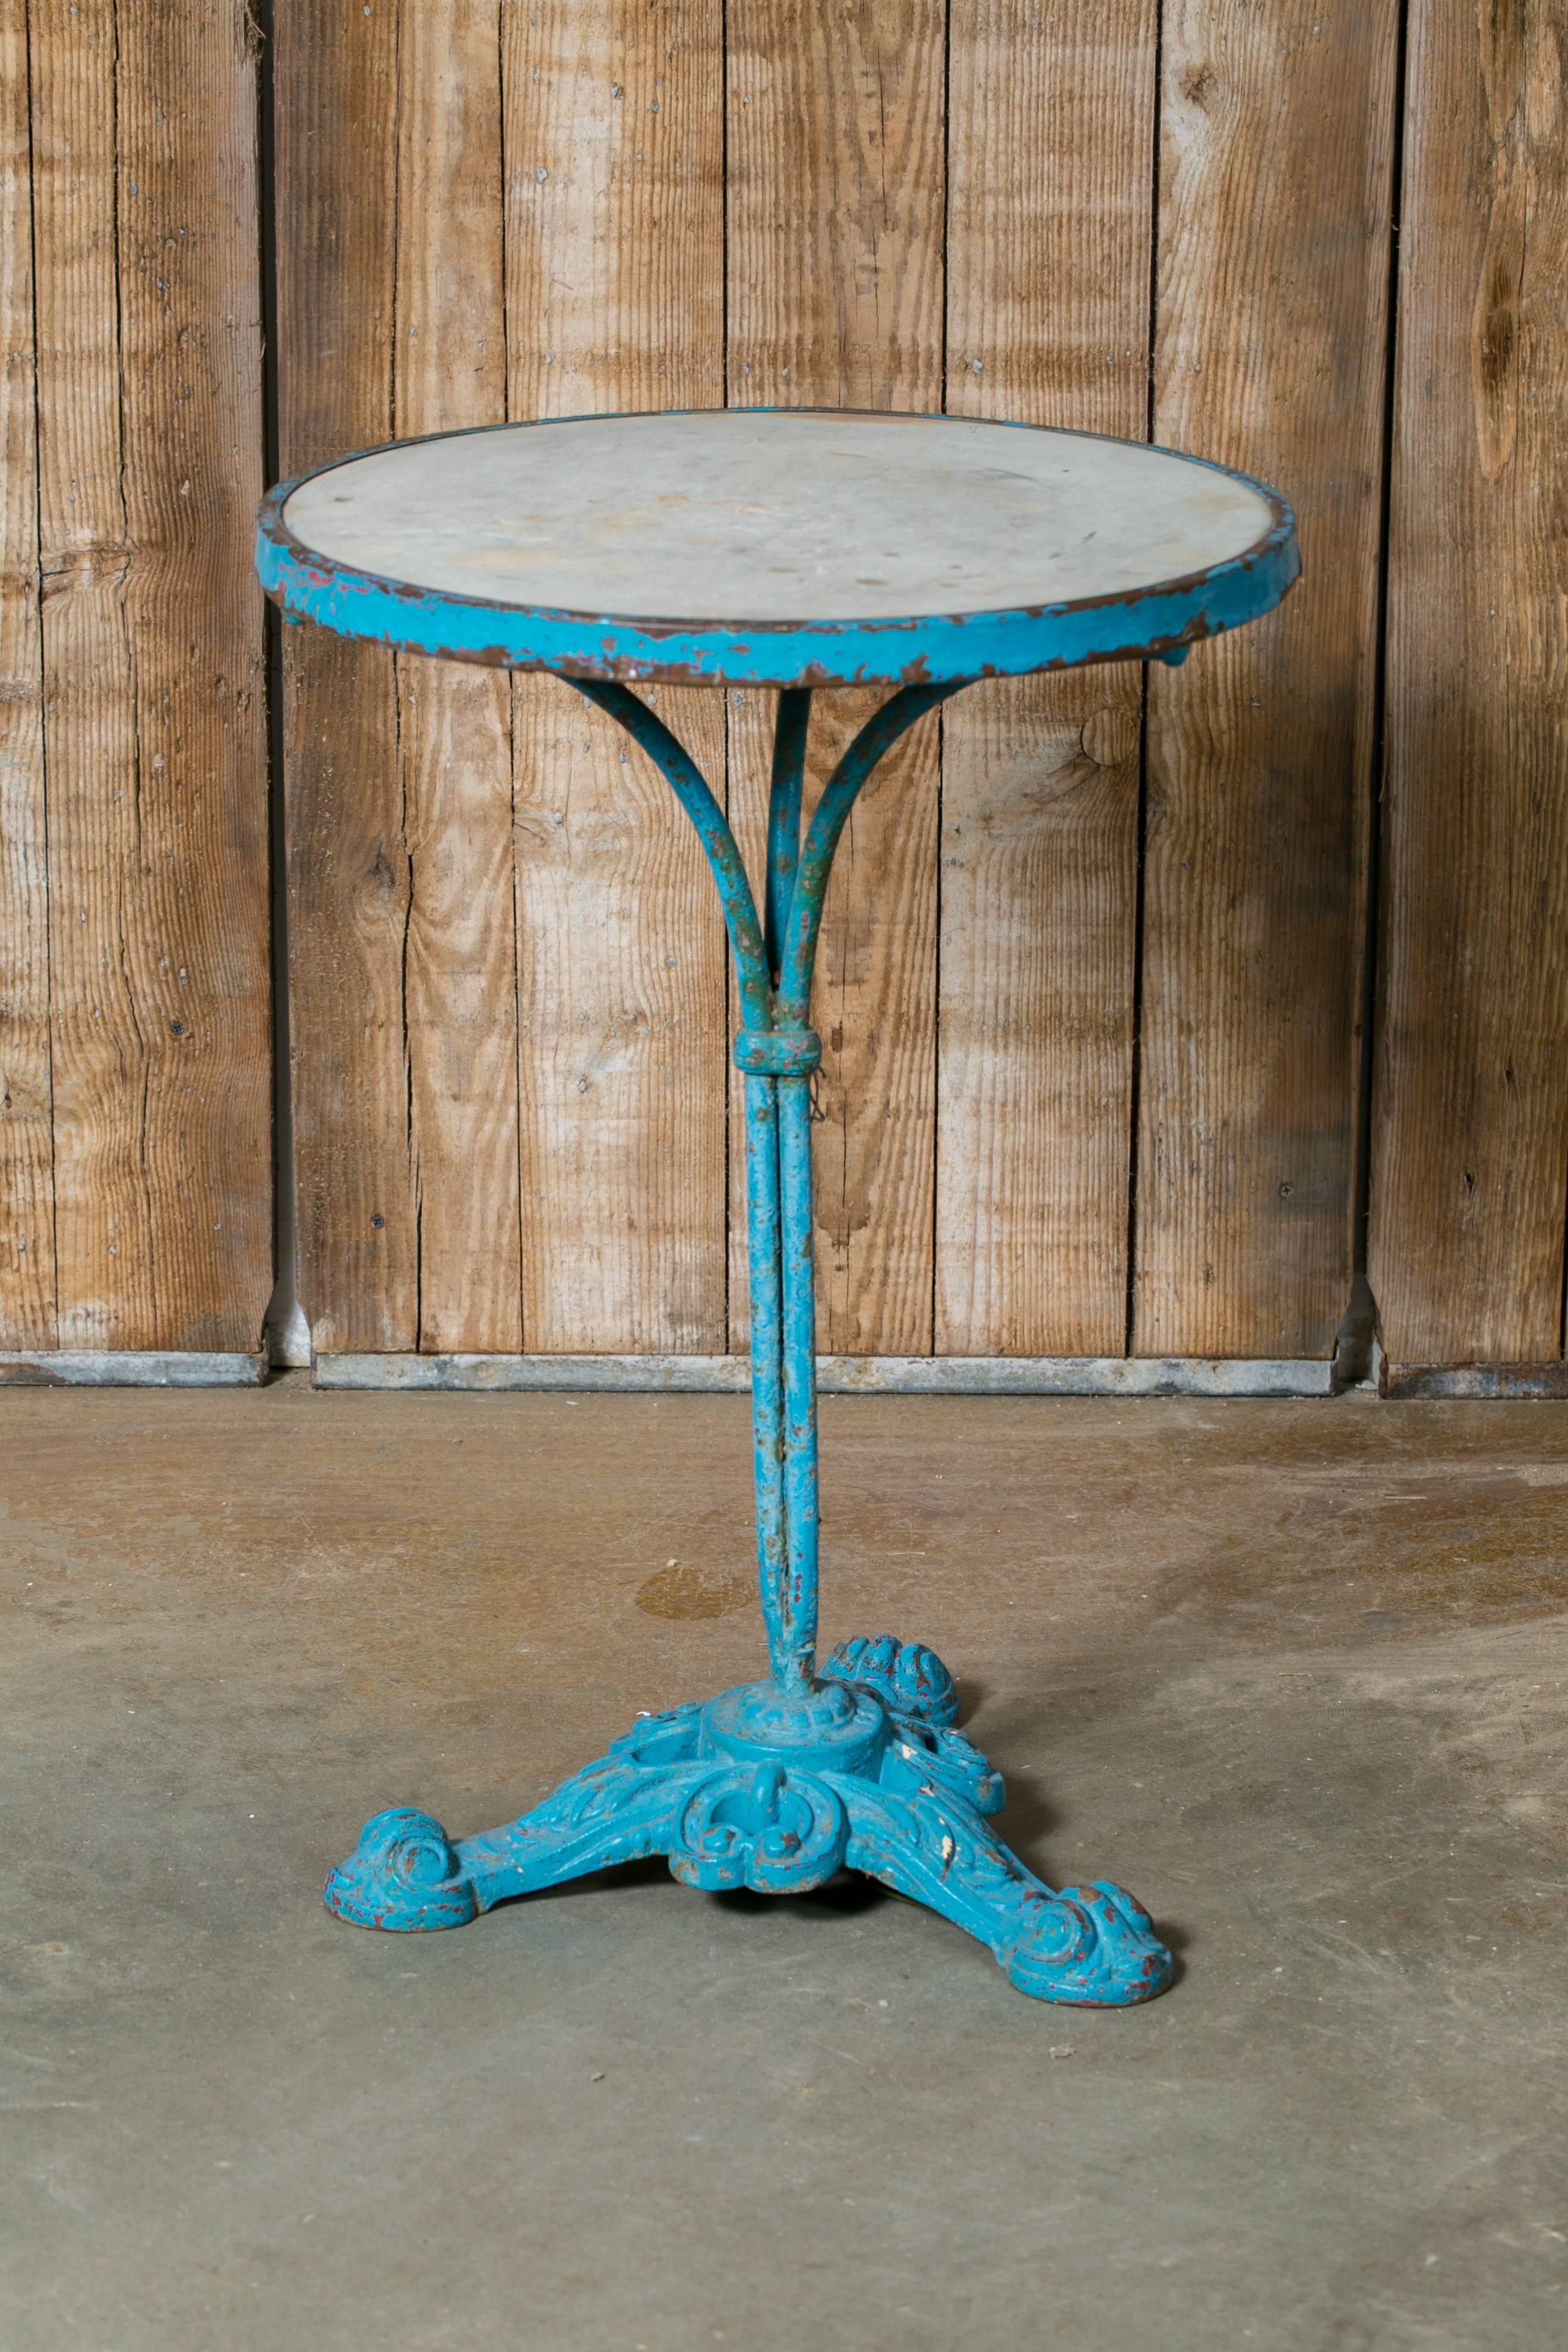 Charming French bistro table with original marble top, brass band and turquoise over-painted iron base. Pretty, decorative three footed base. Would make a great bedside table. From France, circa 1900.